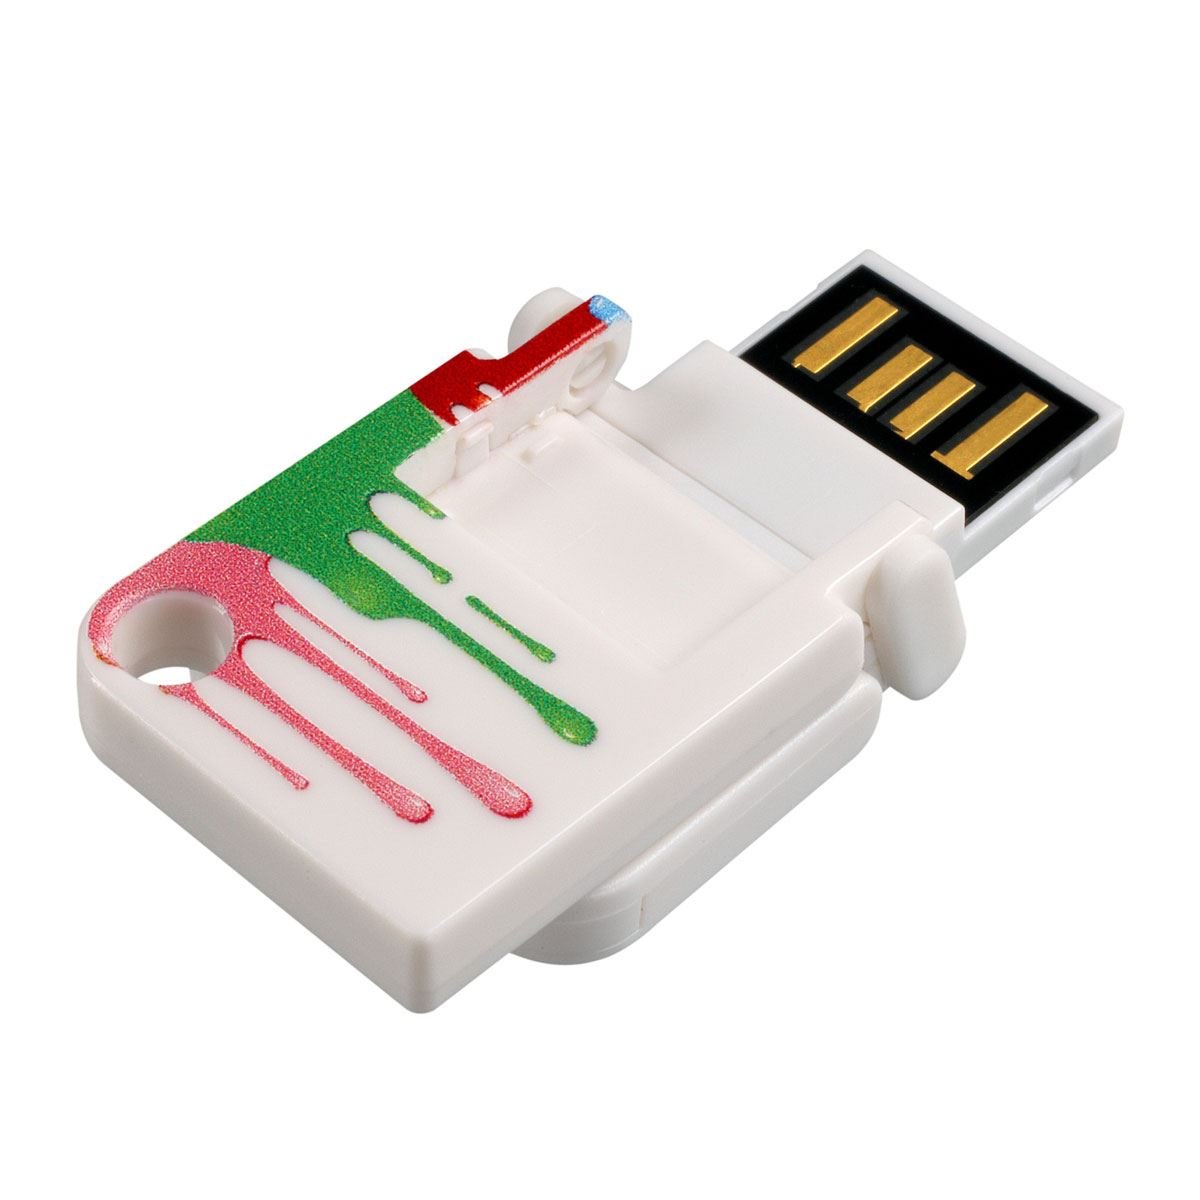 Sandisk Cruzer® Pop™,  Paint White with colors